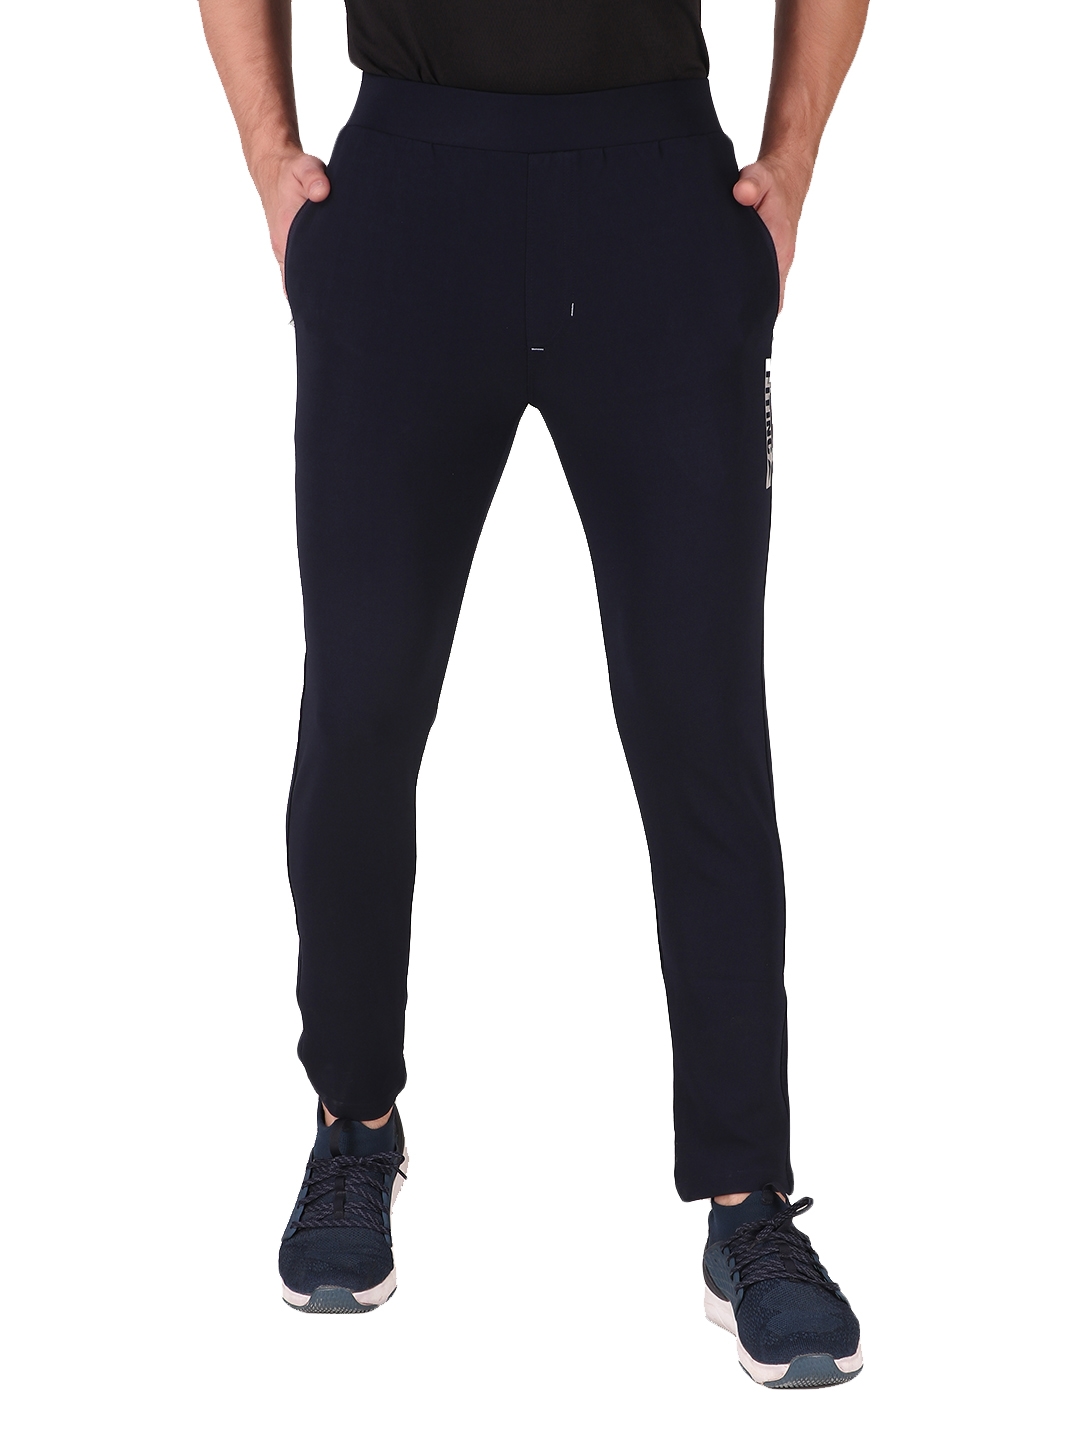 Fitinc | Fitinc Gym Yoga Active Sports Wear Navy Blue Sweat Track Pants for Men